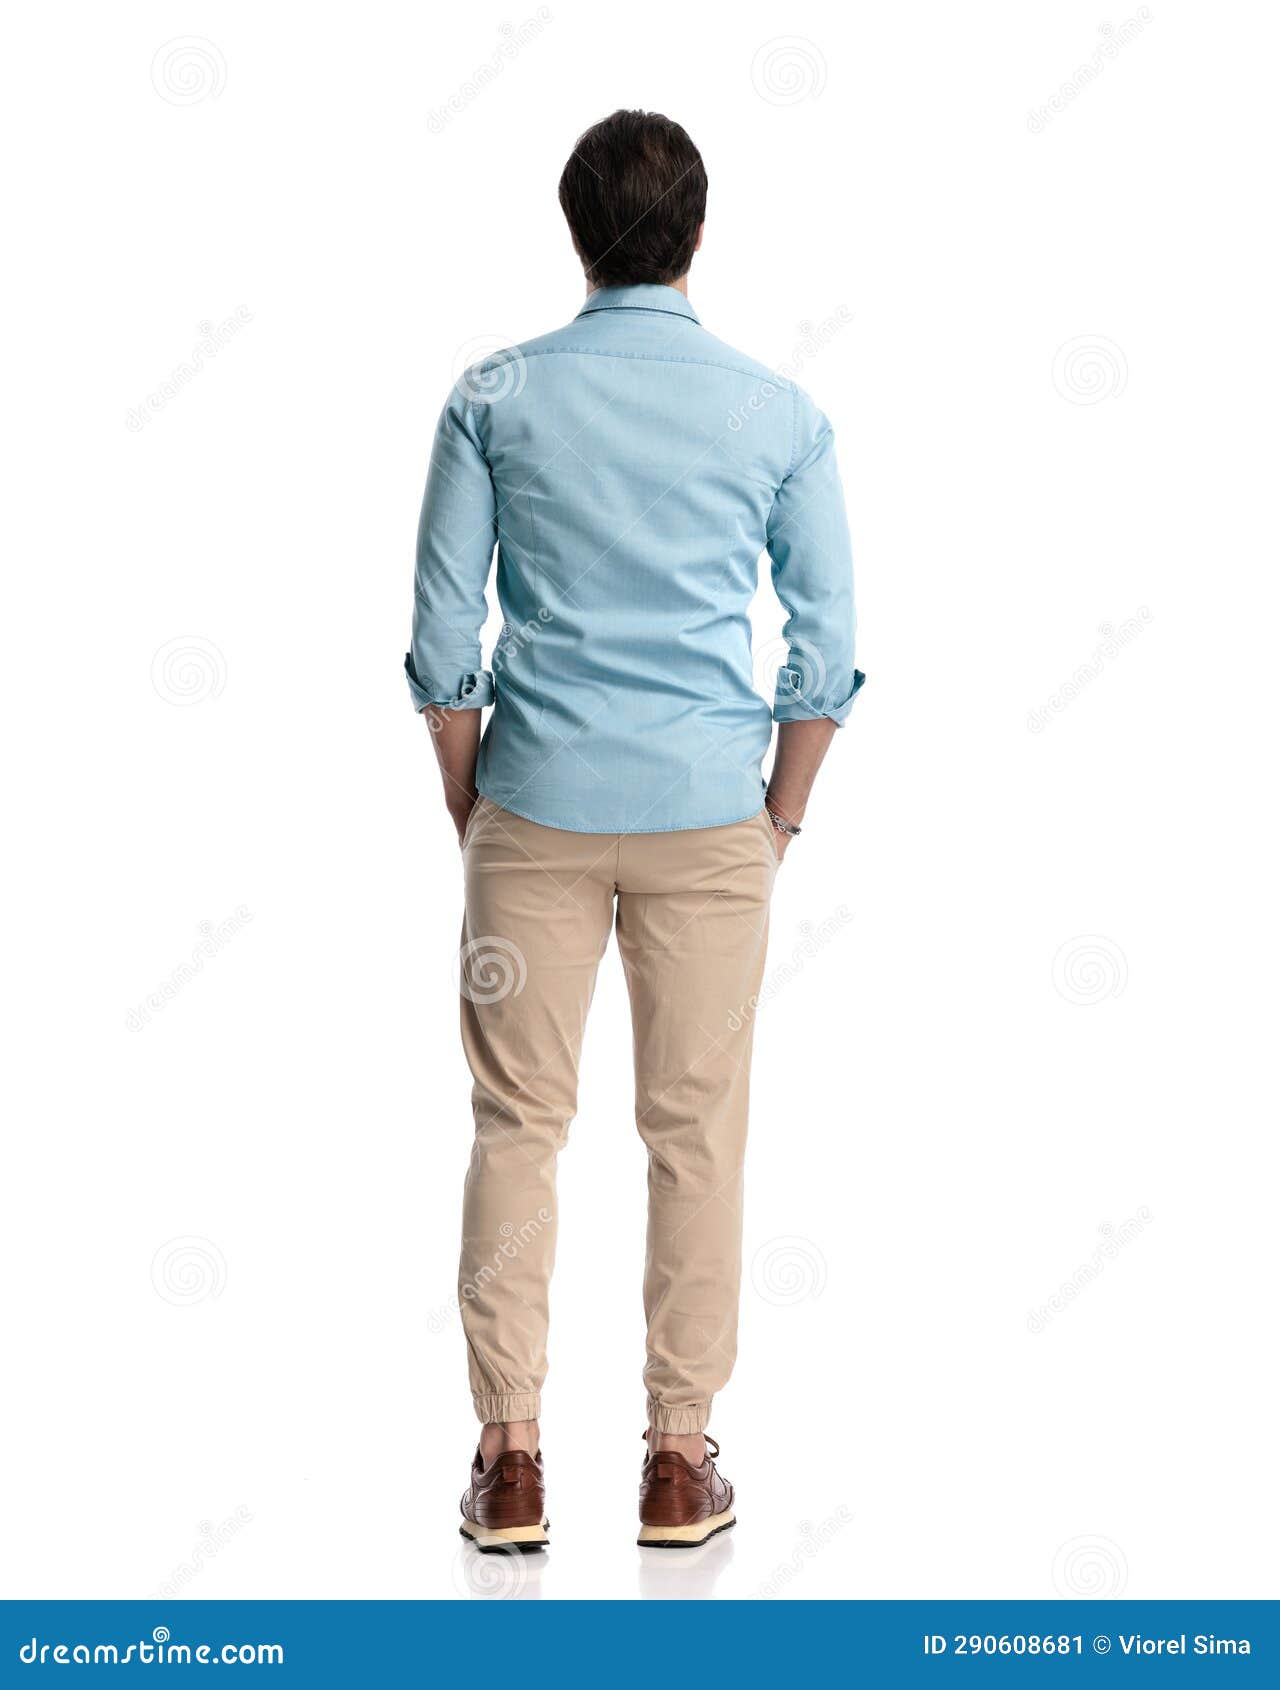 rear view of casual man in denim shirt with chino pants holding hands in pockets